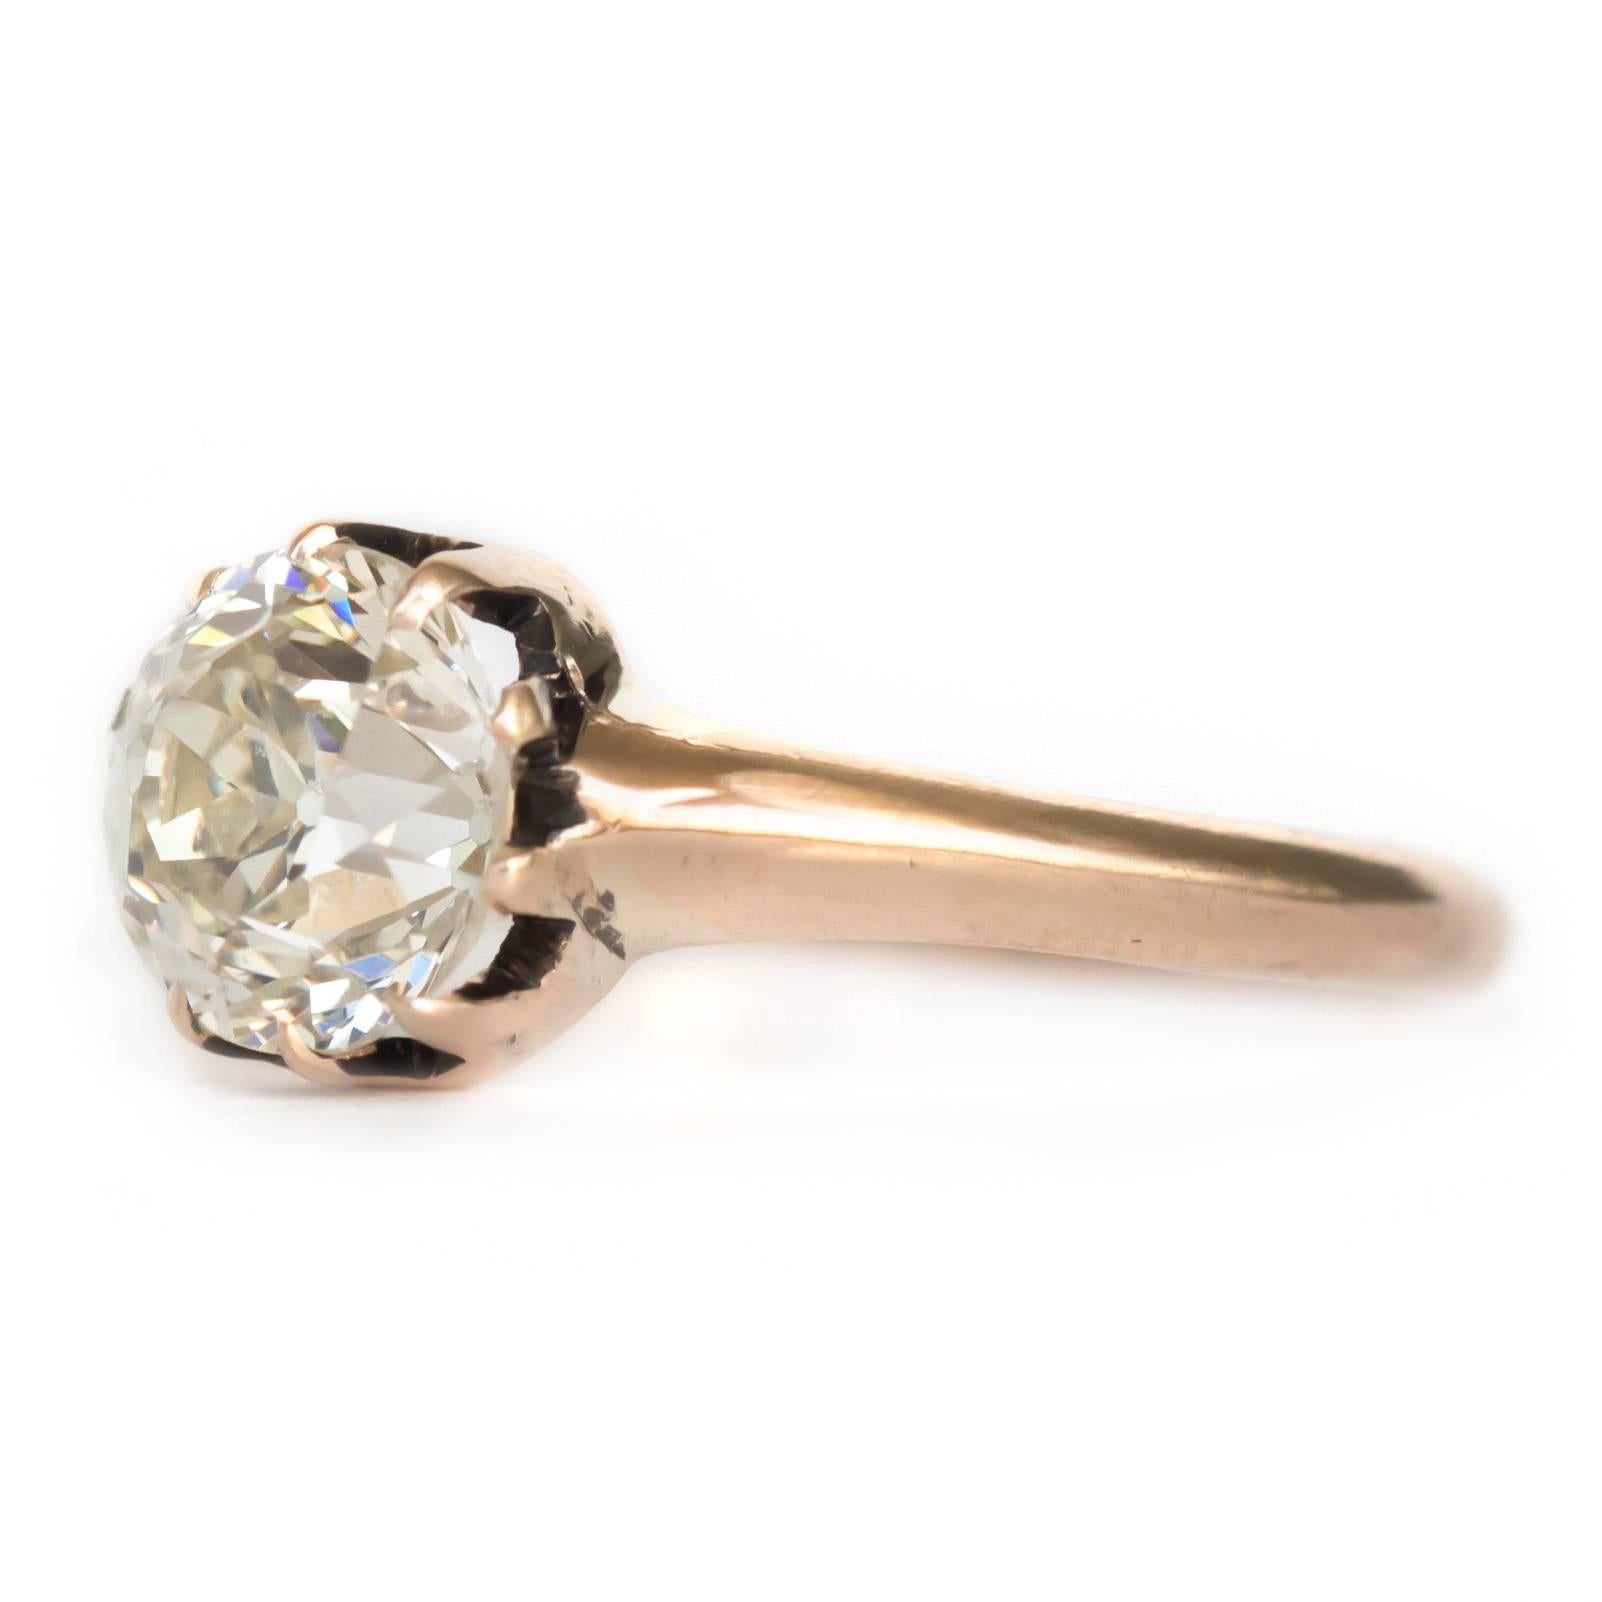 Item Details: 
Ring Size: Approximately 5.45
Metal Type: 14 Karat Yellow Gold
Weight: 1.4 grams

Center Diamond Details:
Shape: Old European Brilliant
Carat Weight: 1.12 carat
Color: M
Clarity: VS1

Finger to Top of Stone Measurement: 4.29mm
